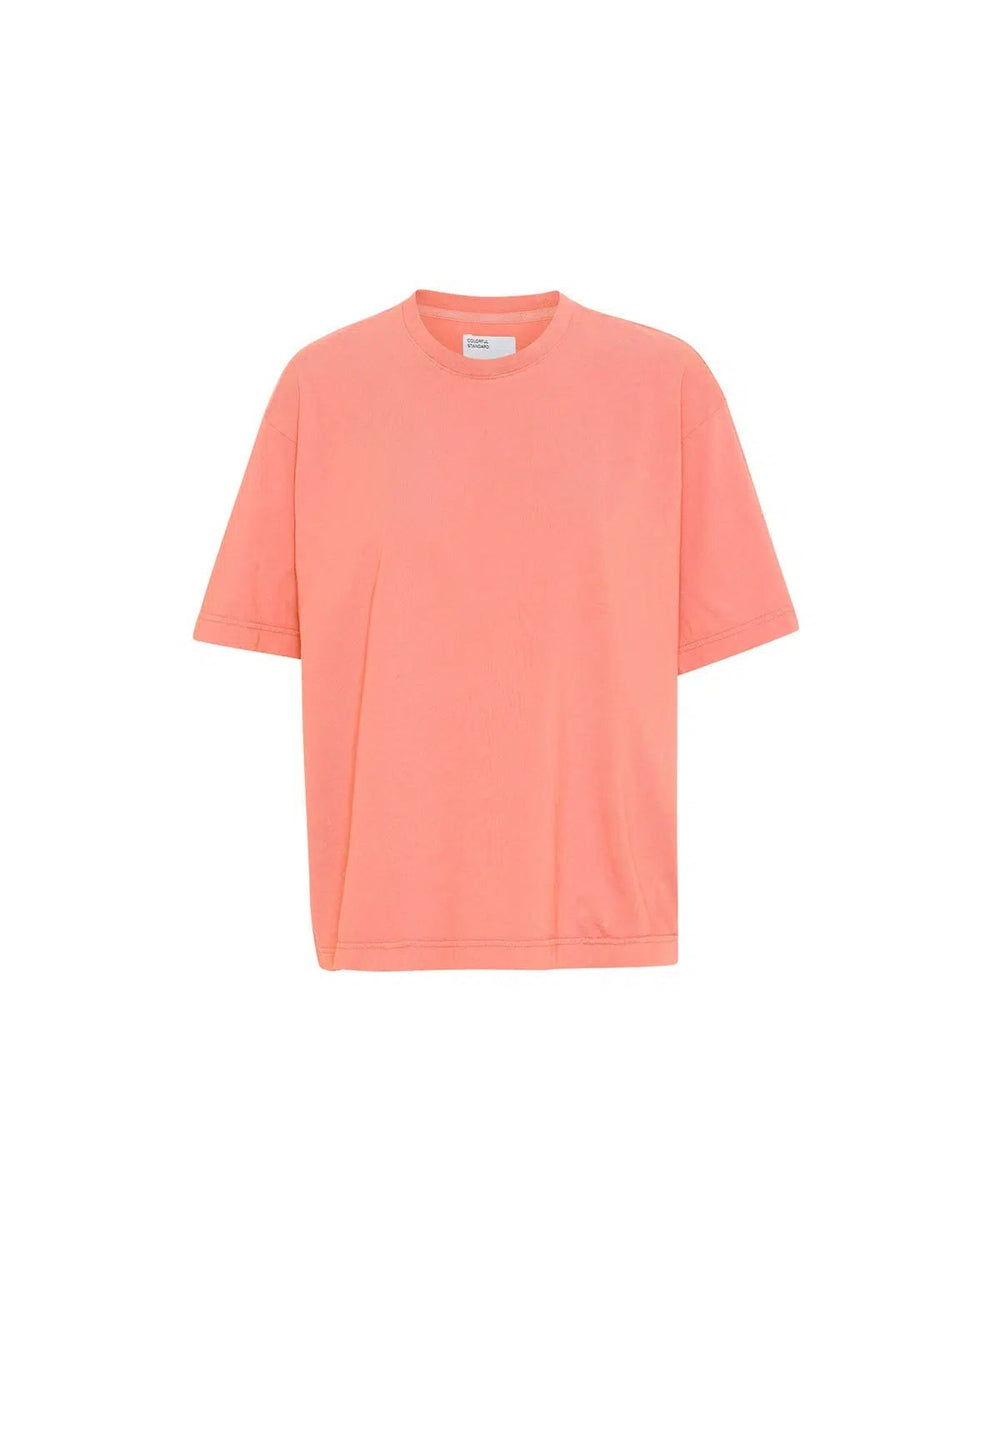 OVERSIZED T-SHIRT BRIGHT CORAL - Moeon